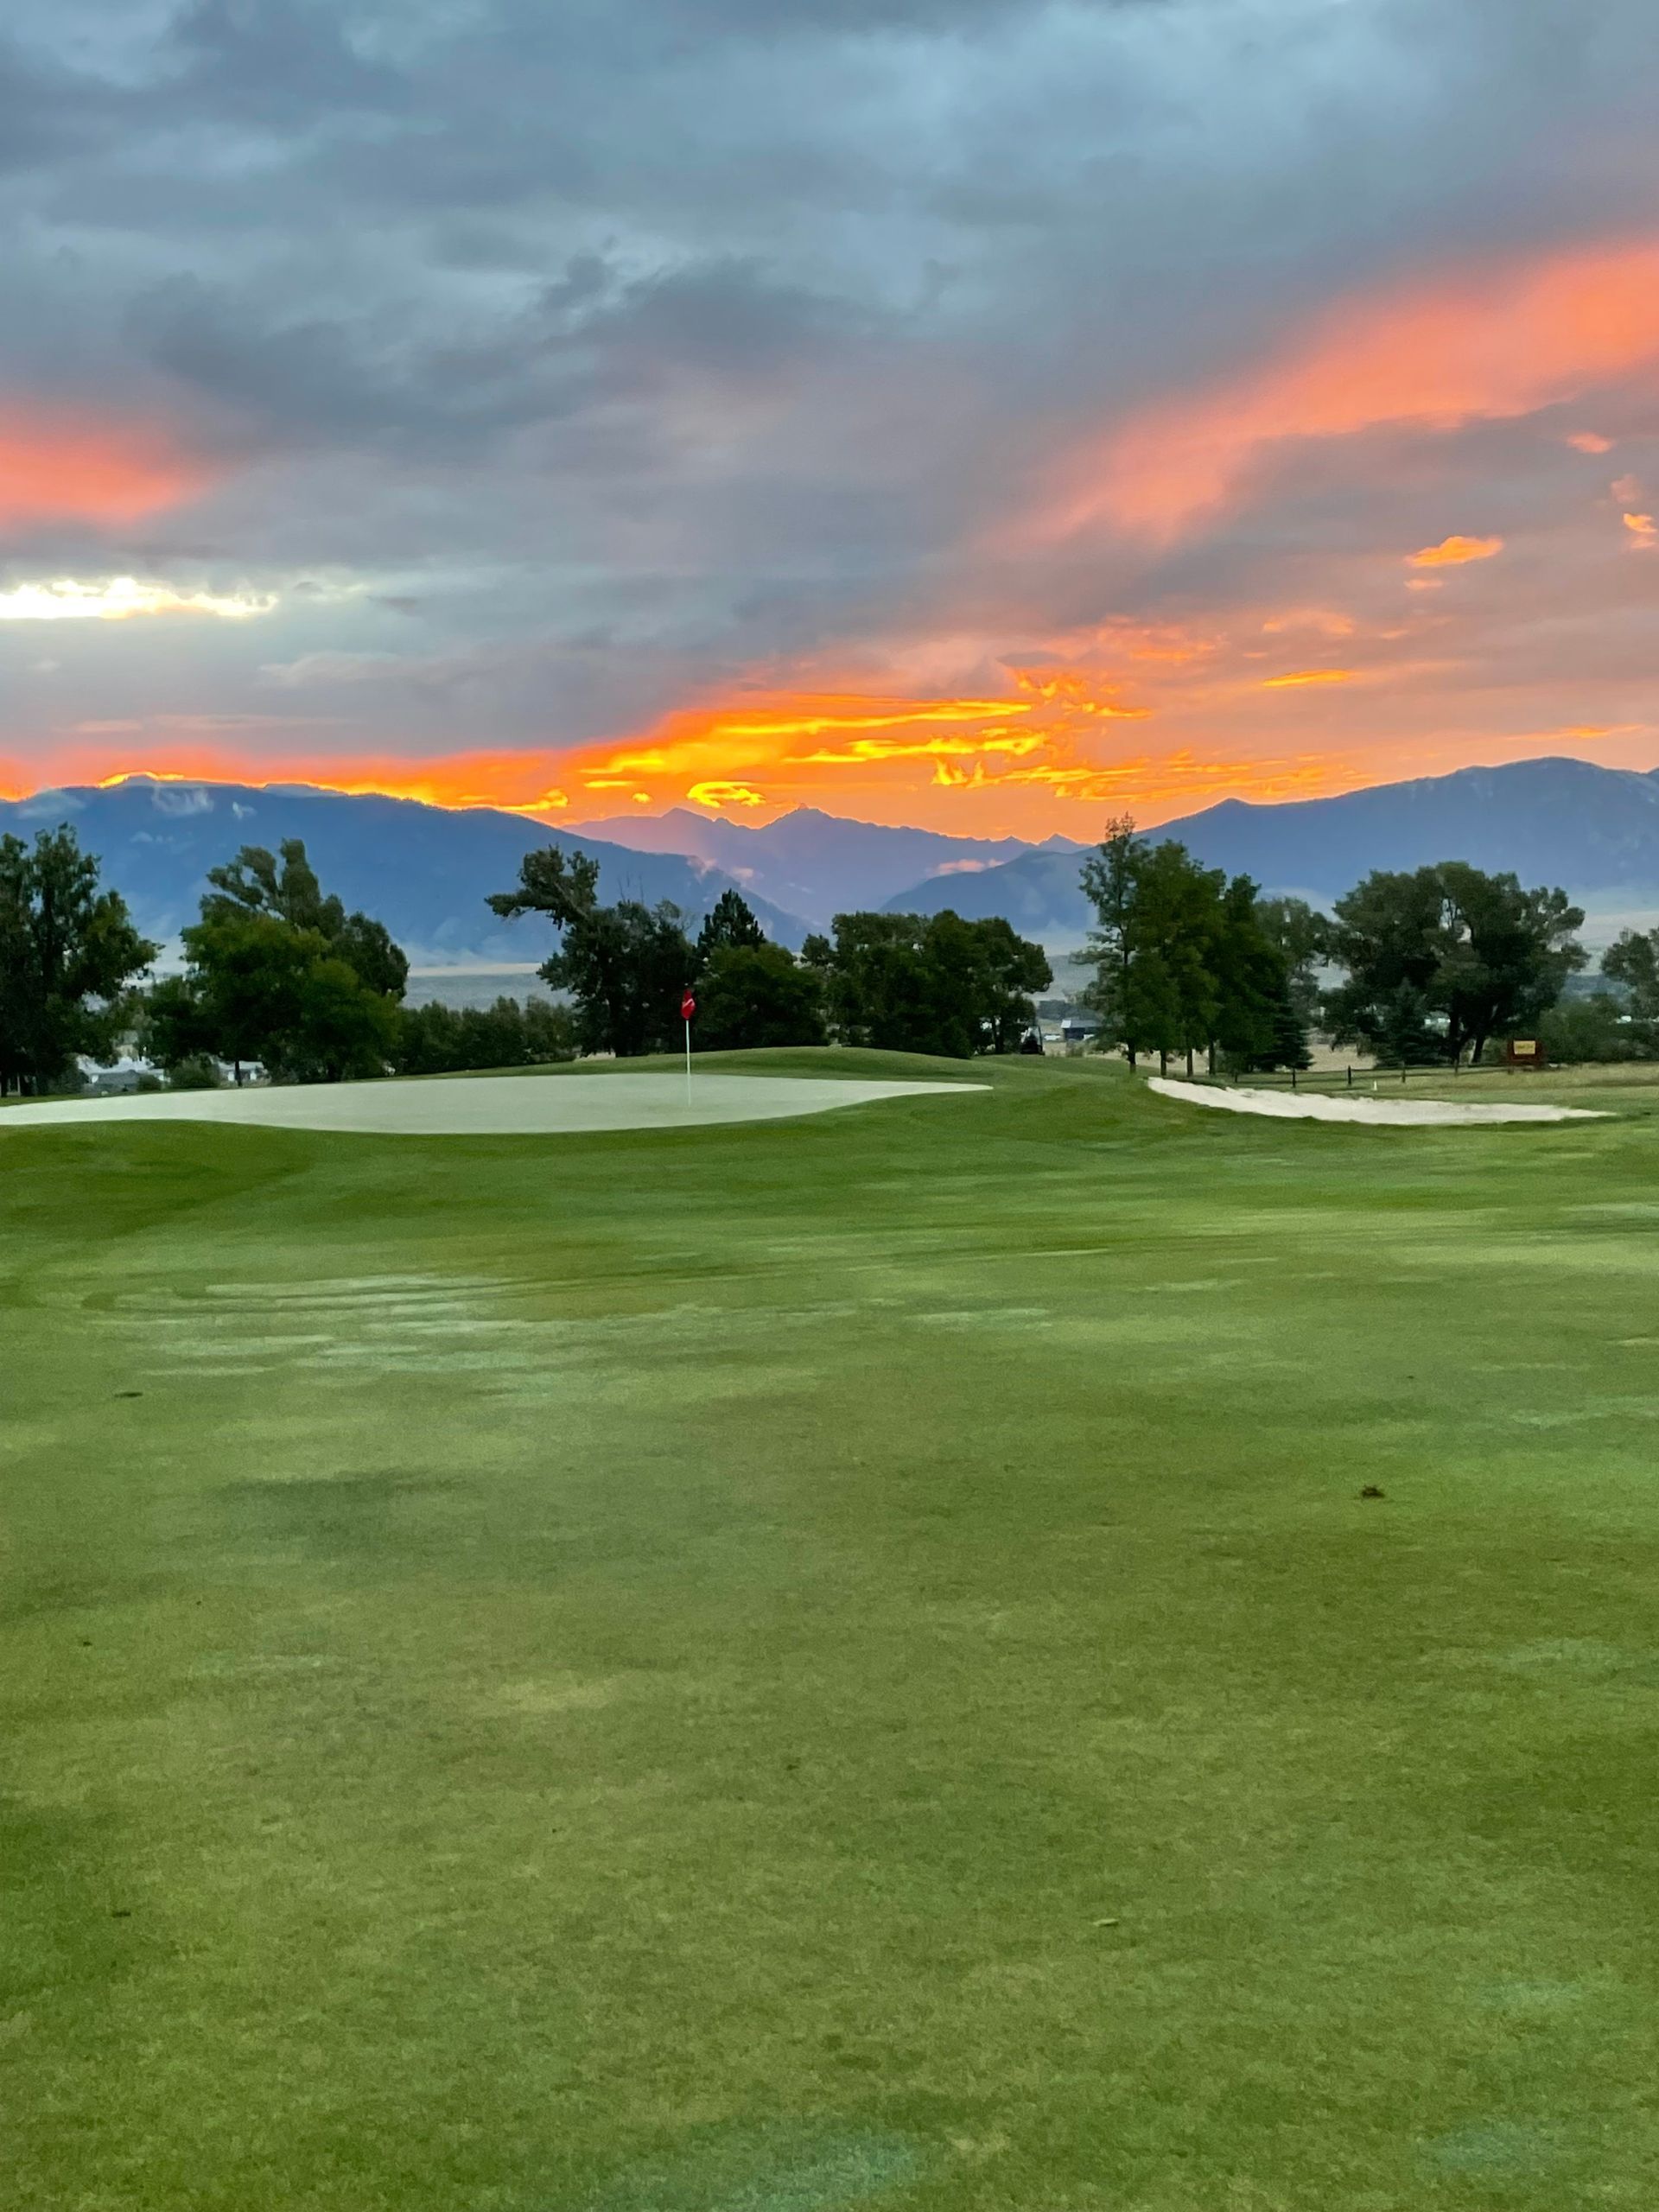 A sunset over a golf course with mountains in the background